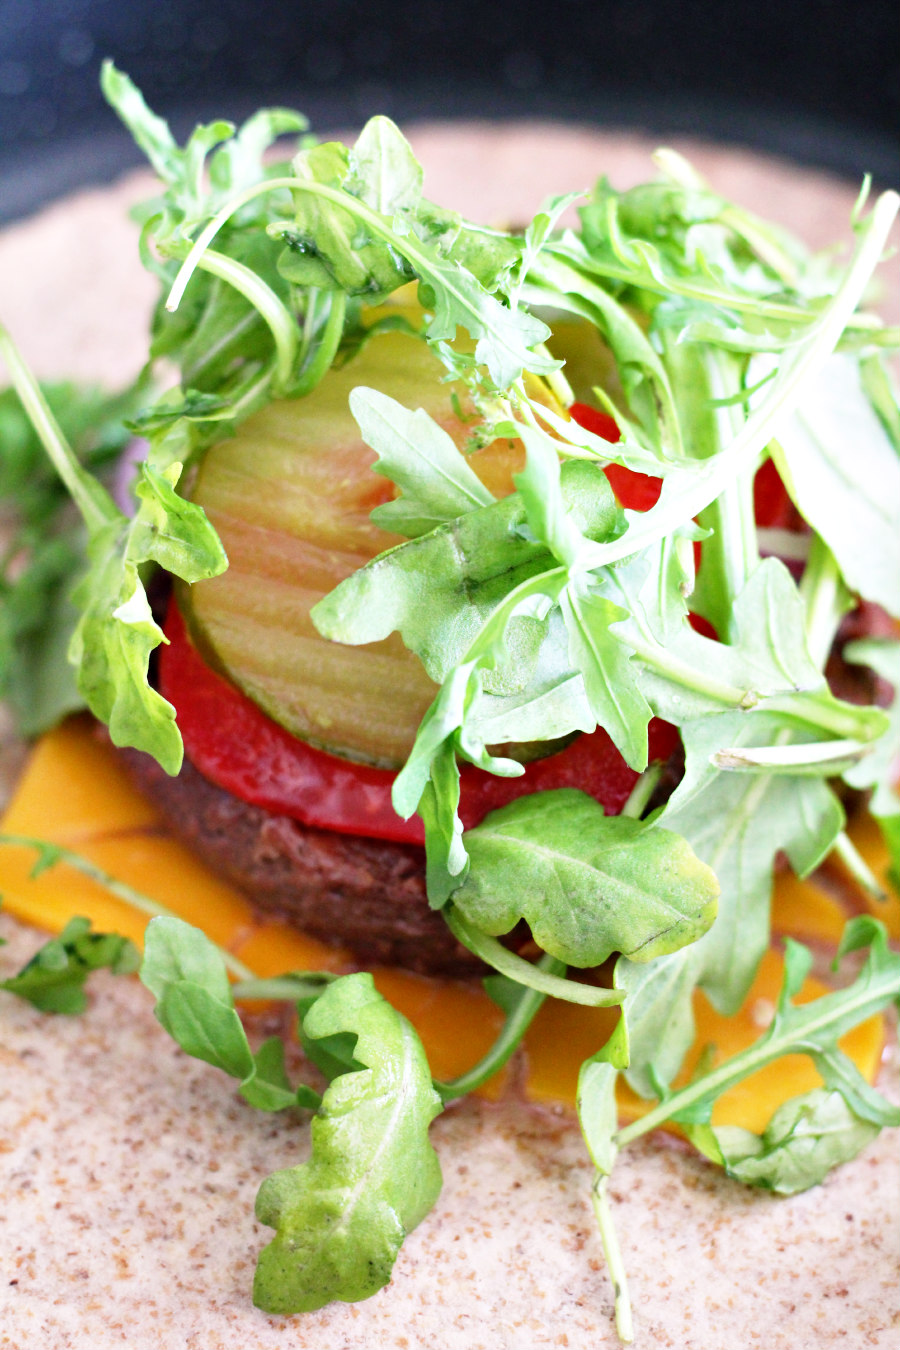 Soft tortilla in skillet topped with plant based cheese, plant based burger patty, tomato, onion, pickles, and arugula.